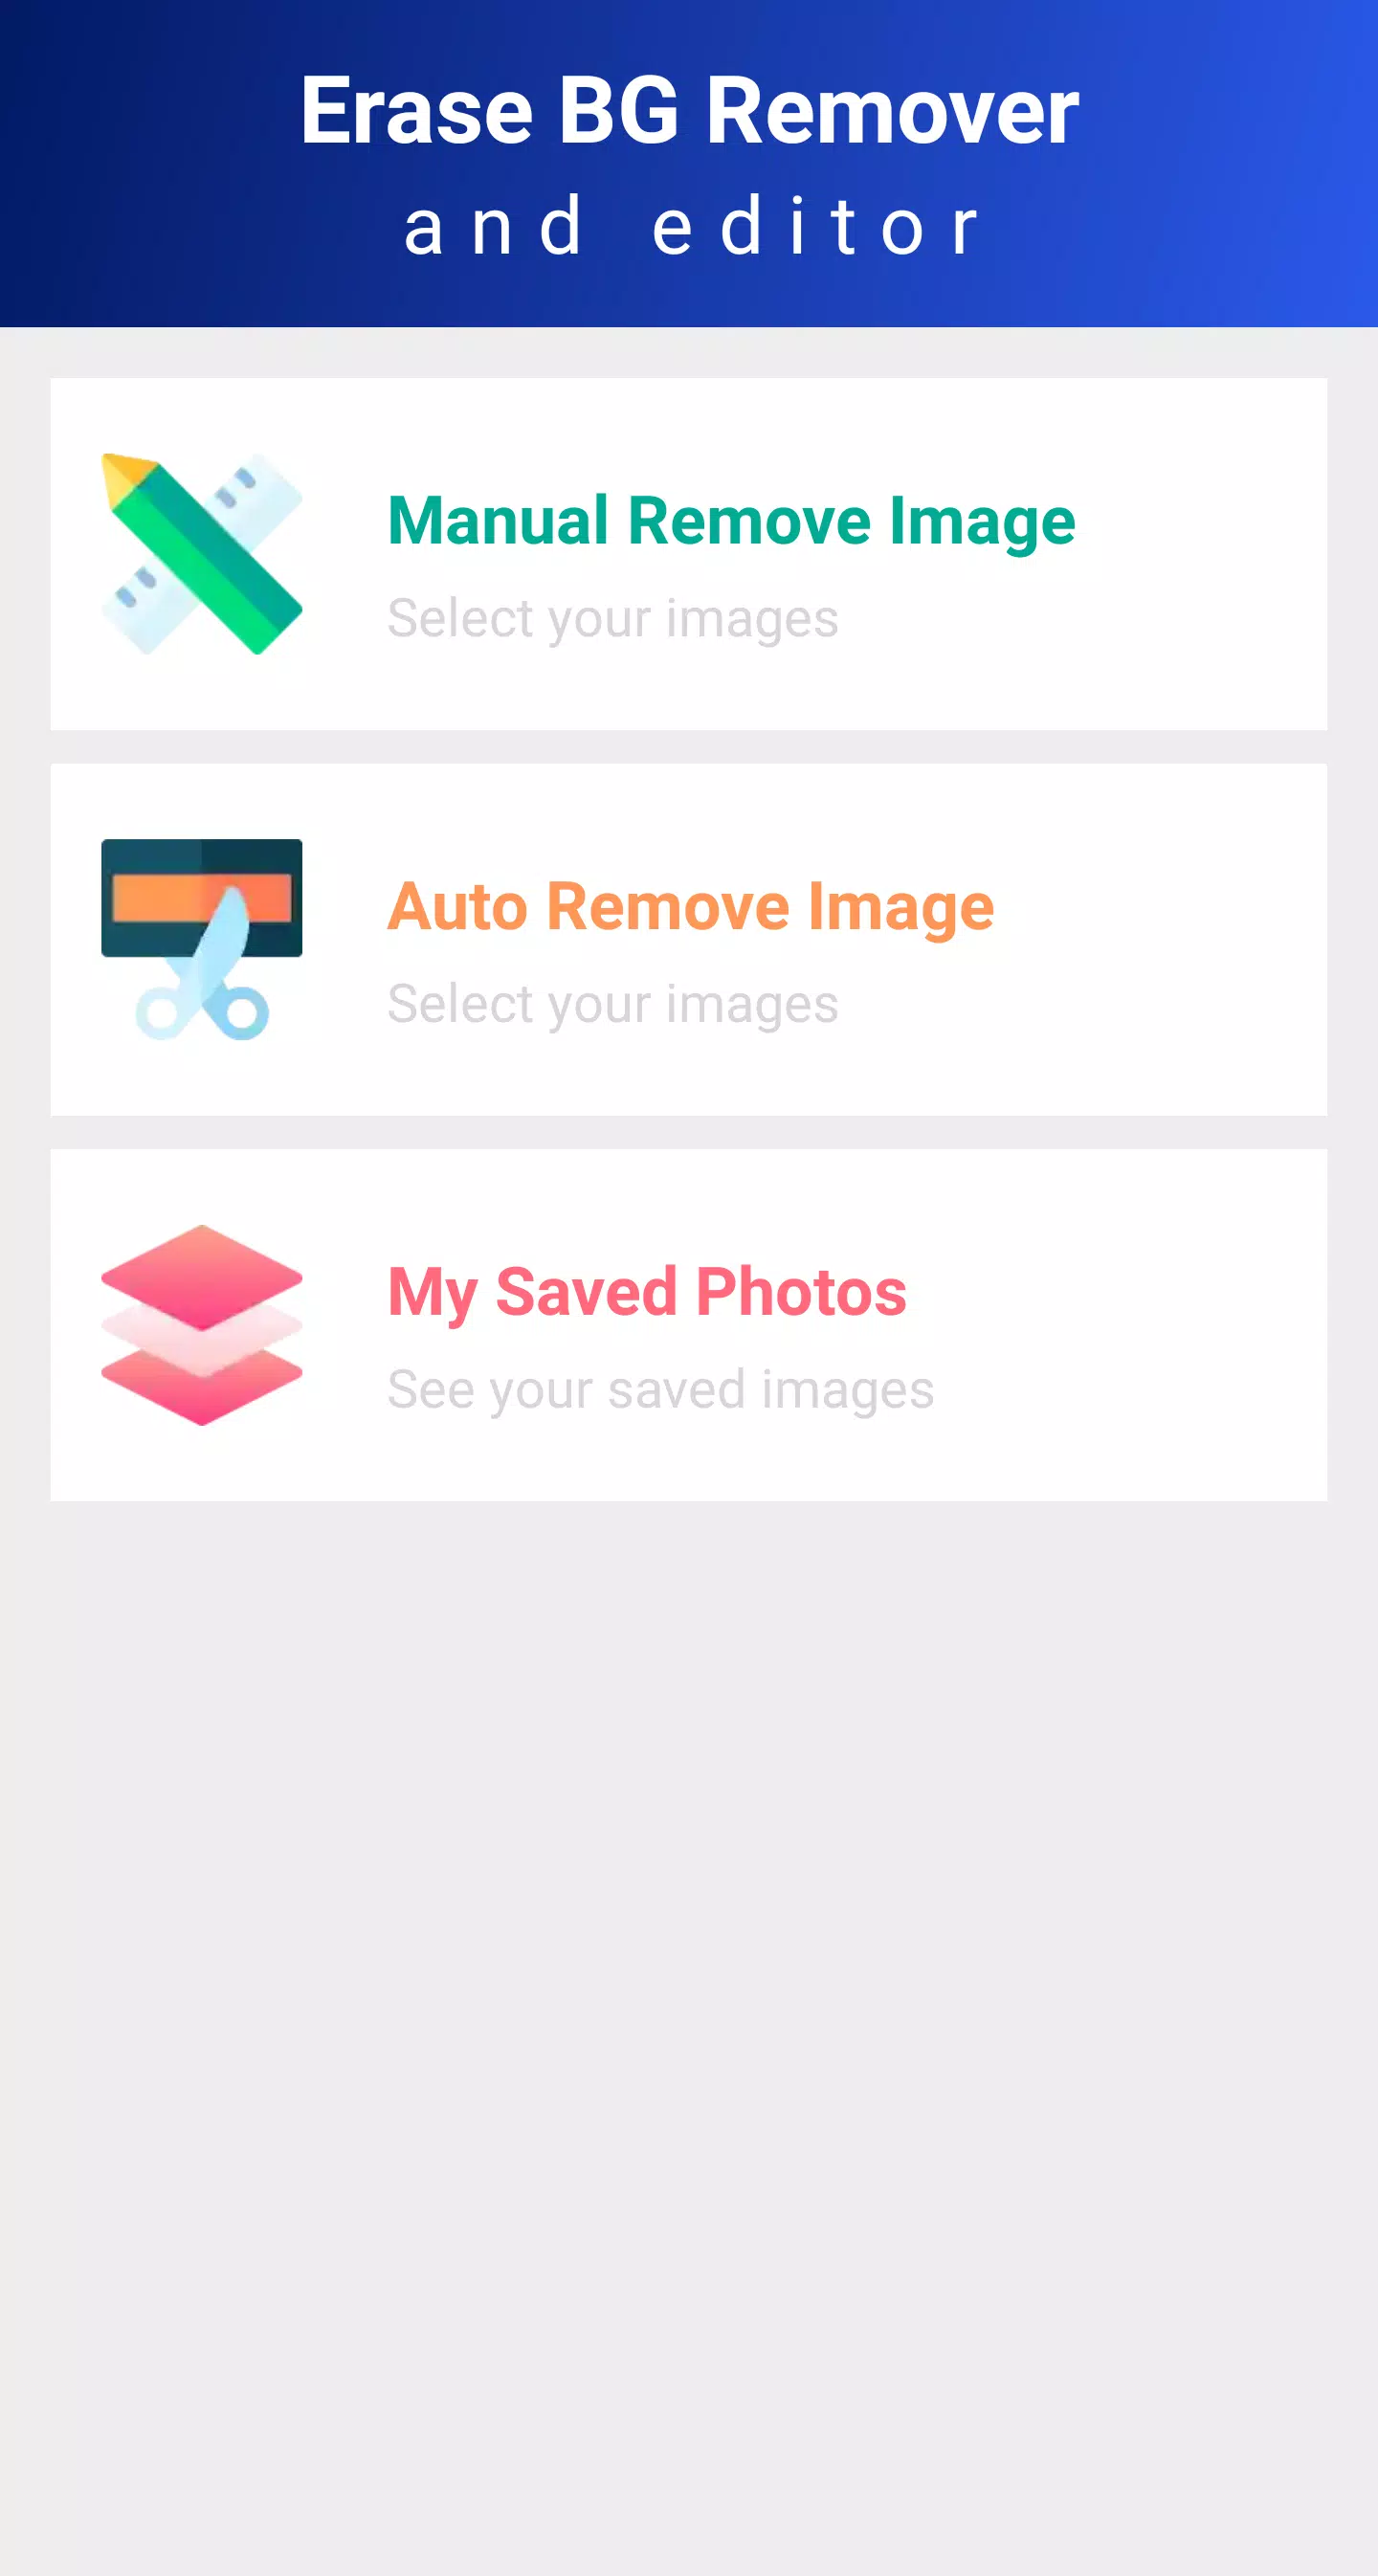 Tải xuống APK Erase Background Remover cho Android